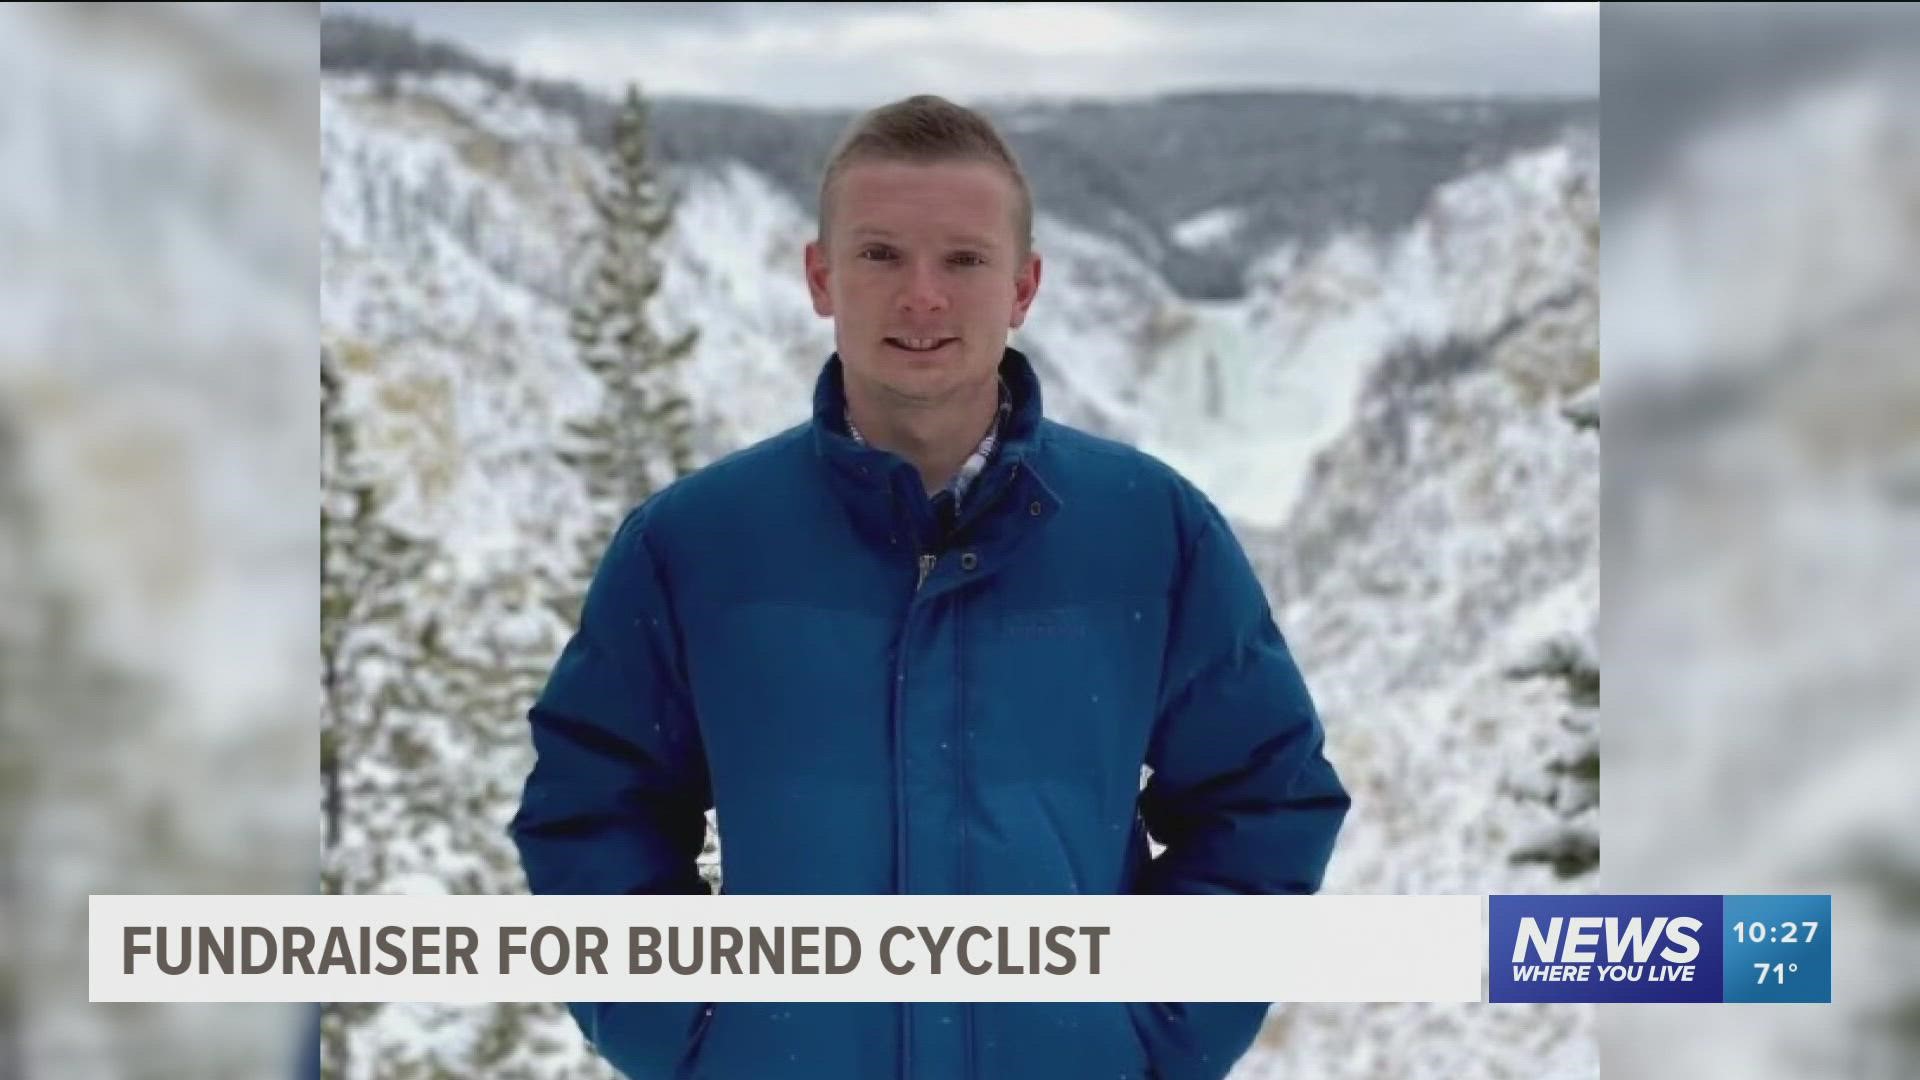 The Benton County bicycling community is raising funds for cyclist Samuel Riester, who is in the ICU after suffering severe burns to most of his body in an accident.